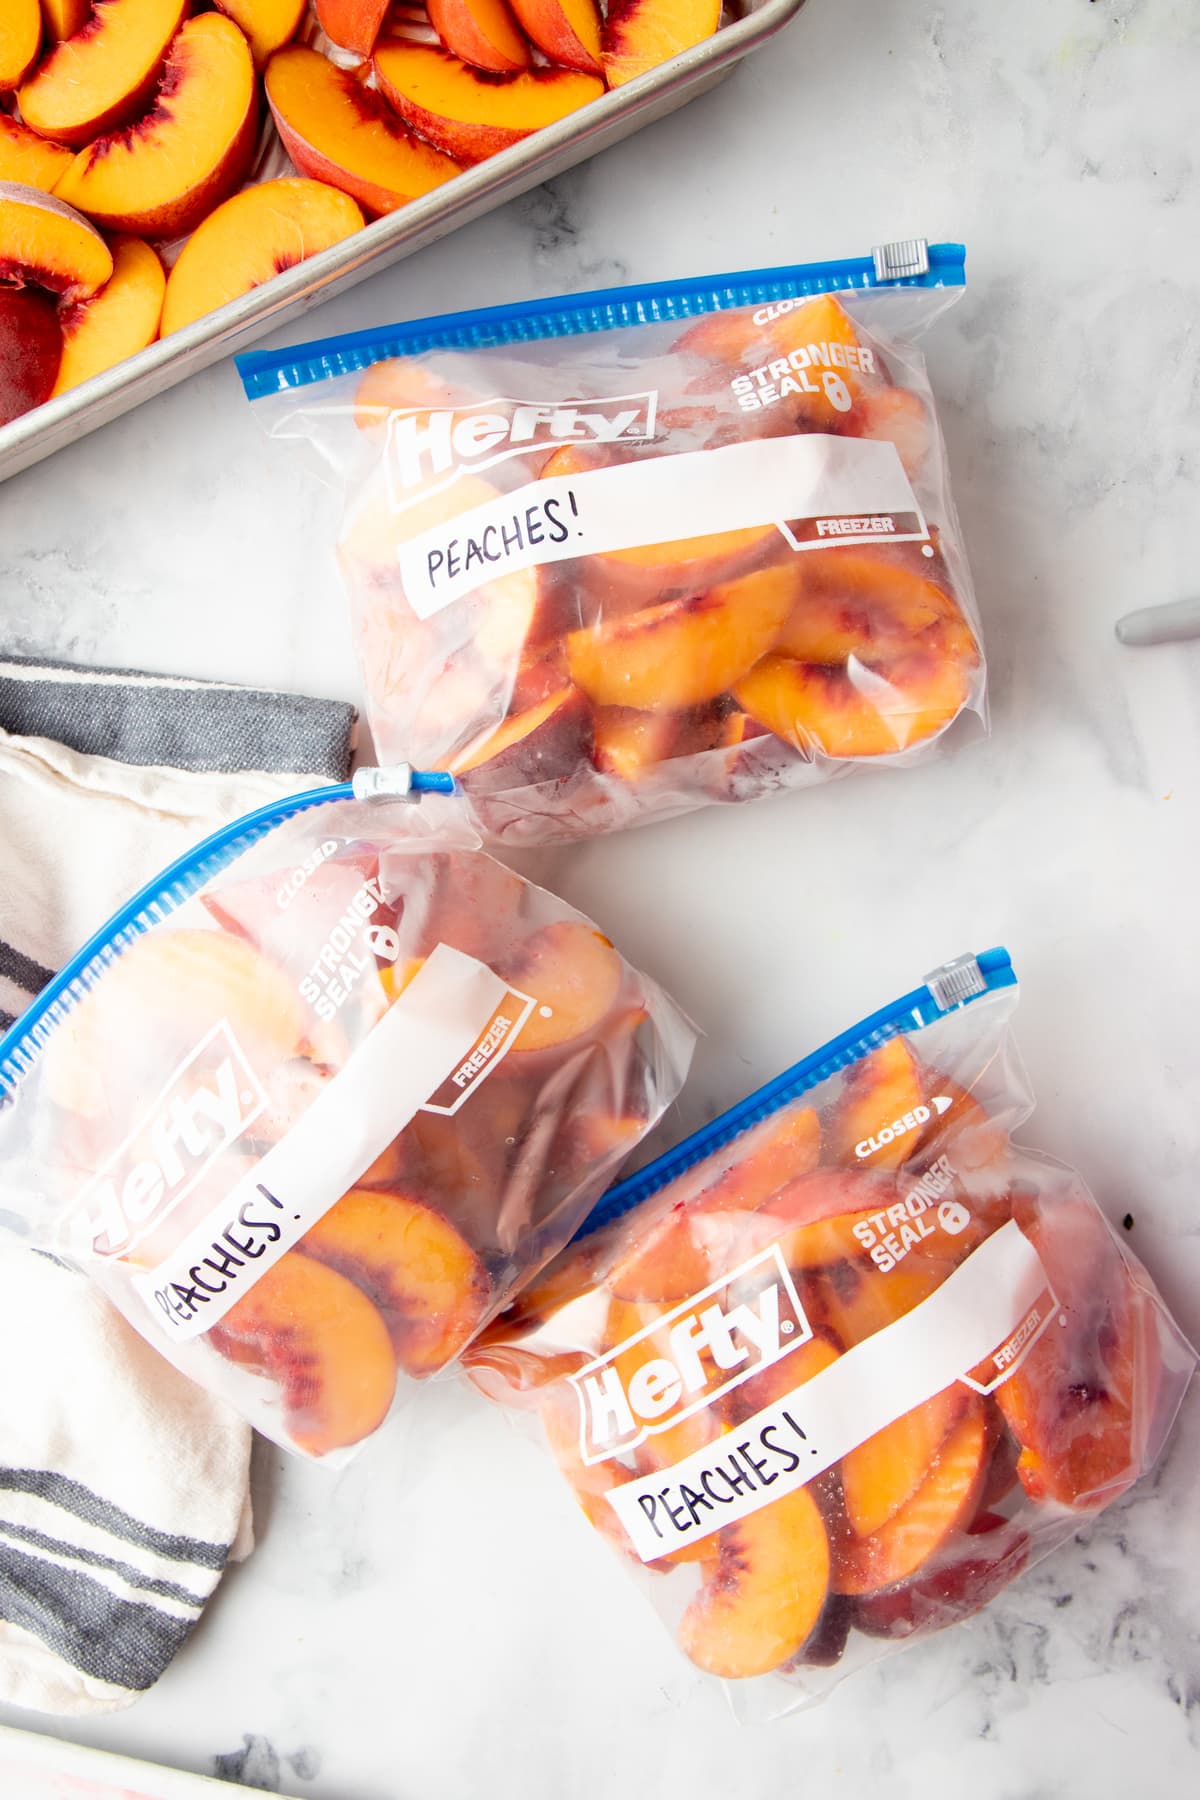 Overhead of three freezer bags filled with individually frozen peach slices lying on their sides. The bags are labeled "Peaches!"